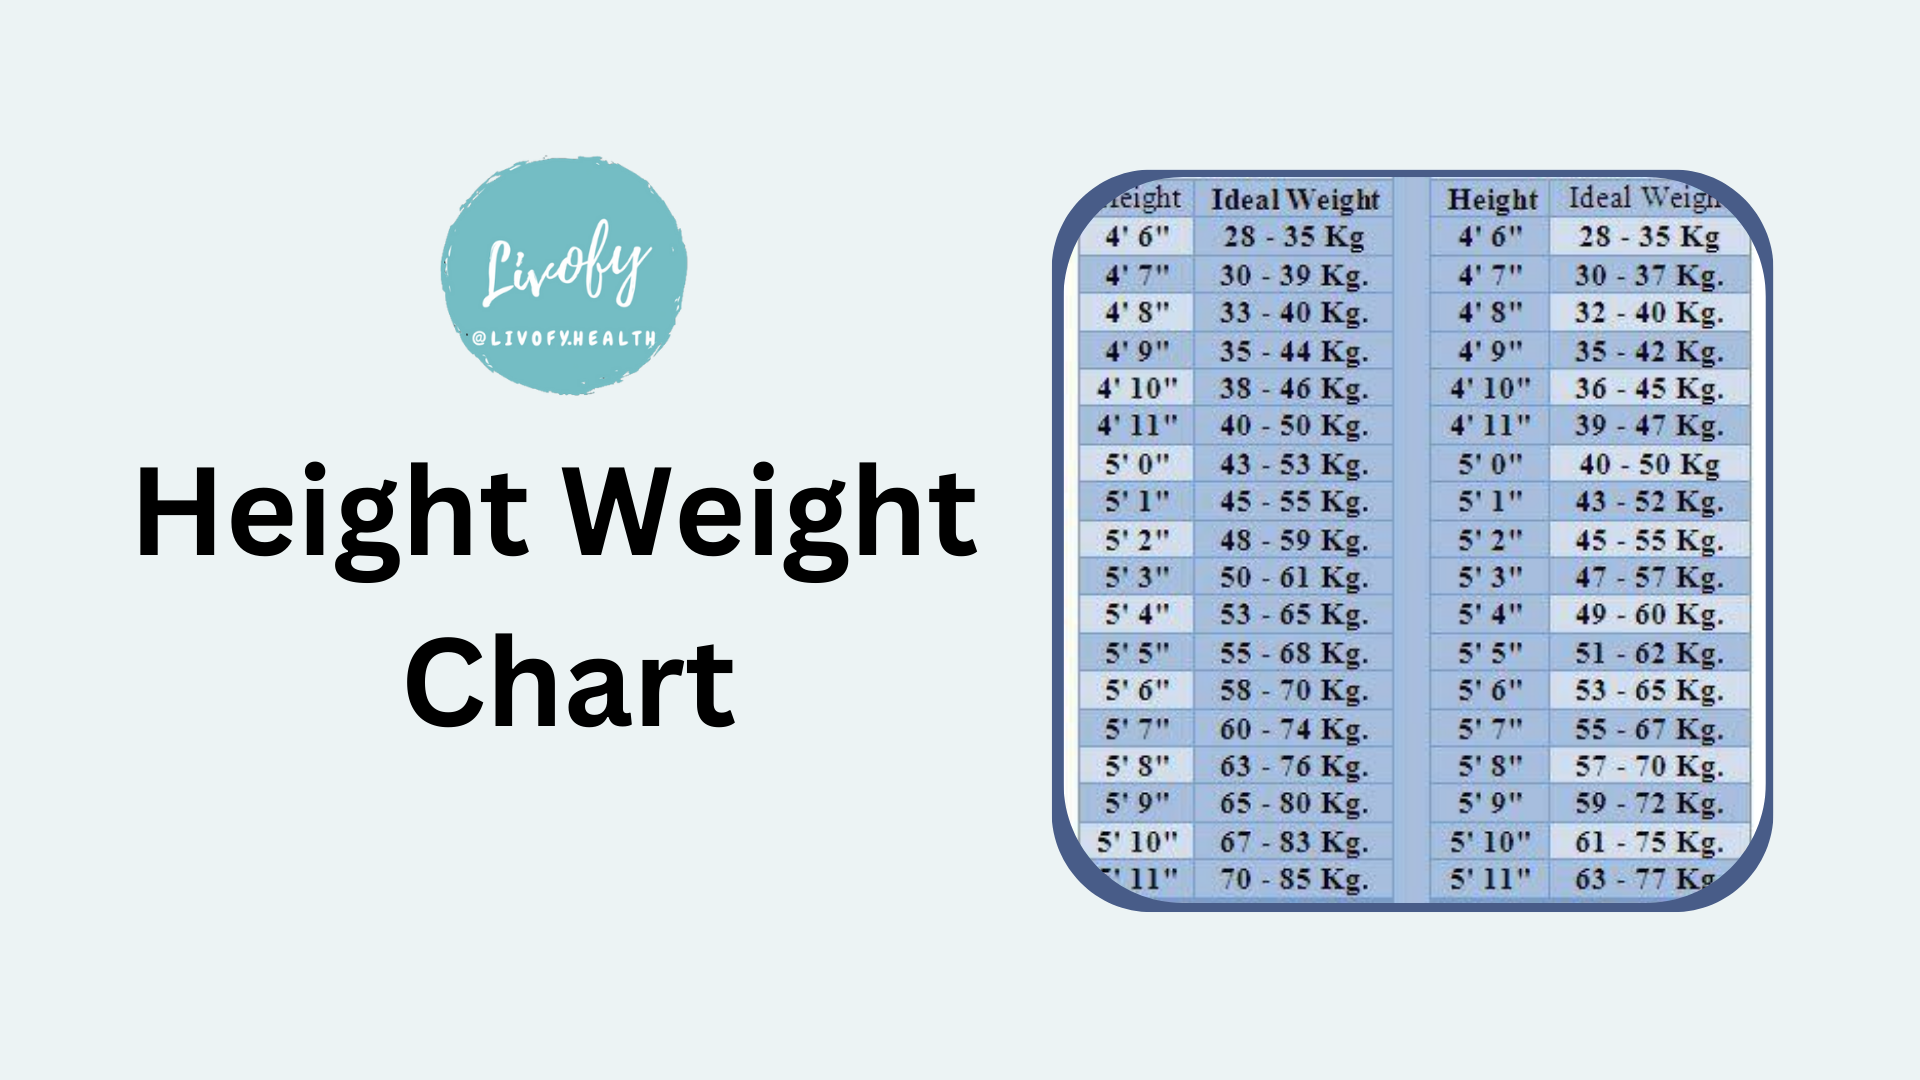 Measuring weight or inches? Which weight-loss tracking method works best